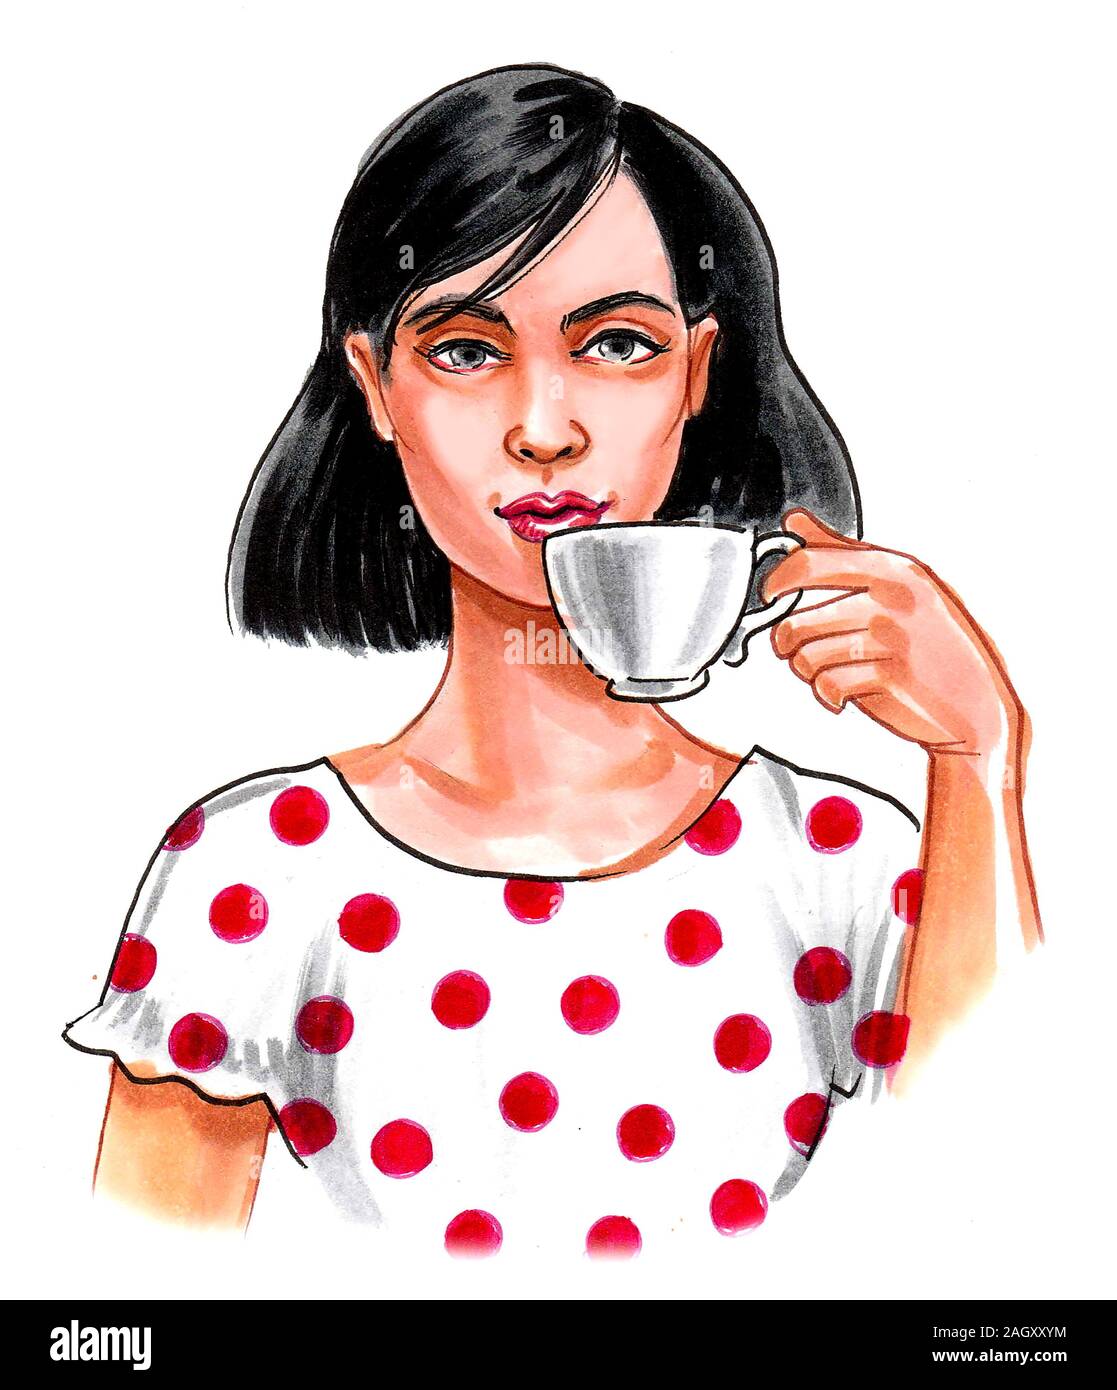 Pretty woman drinking a cup of tea. Ink and watercolor